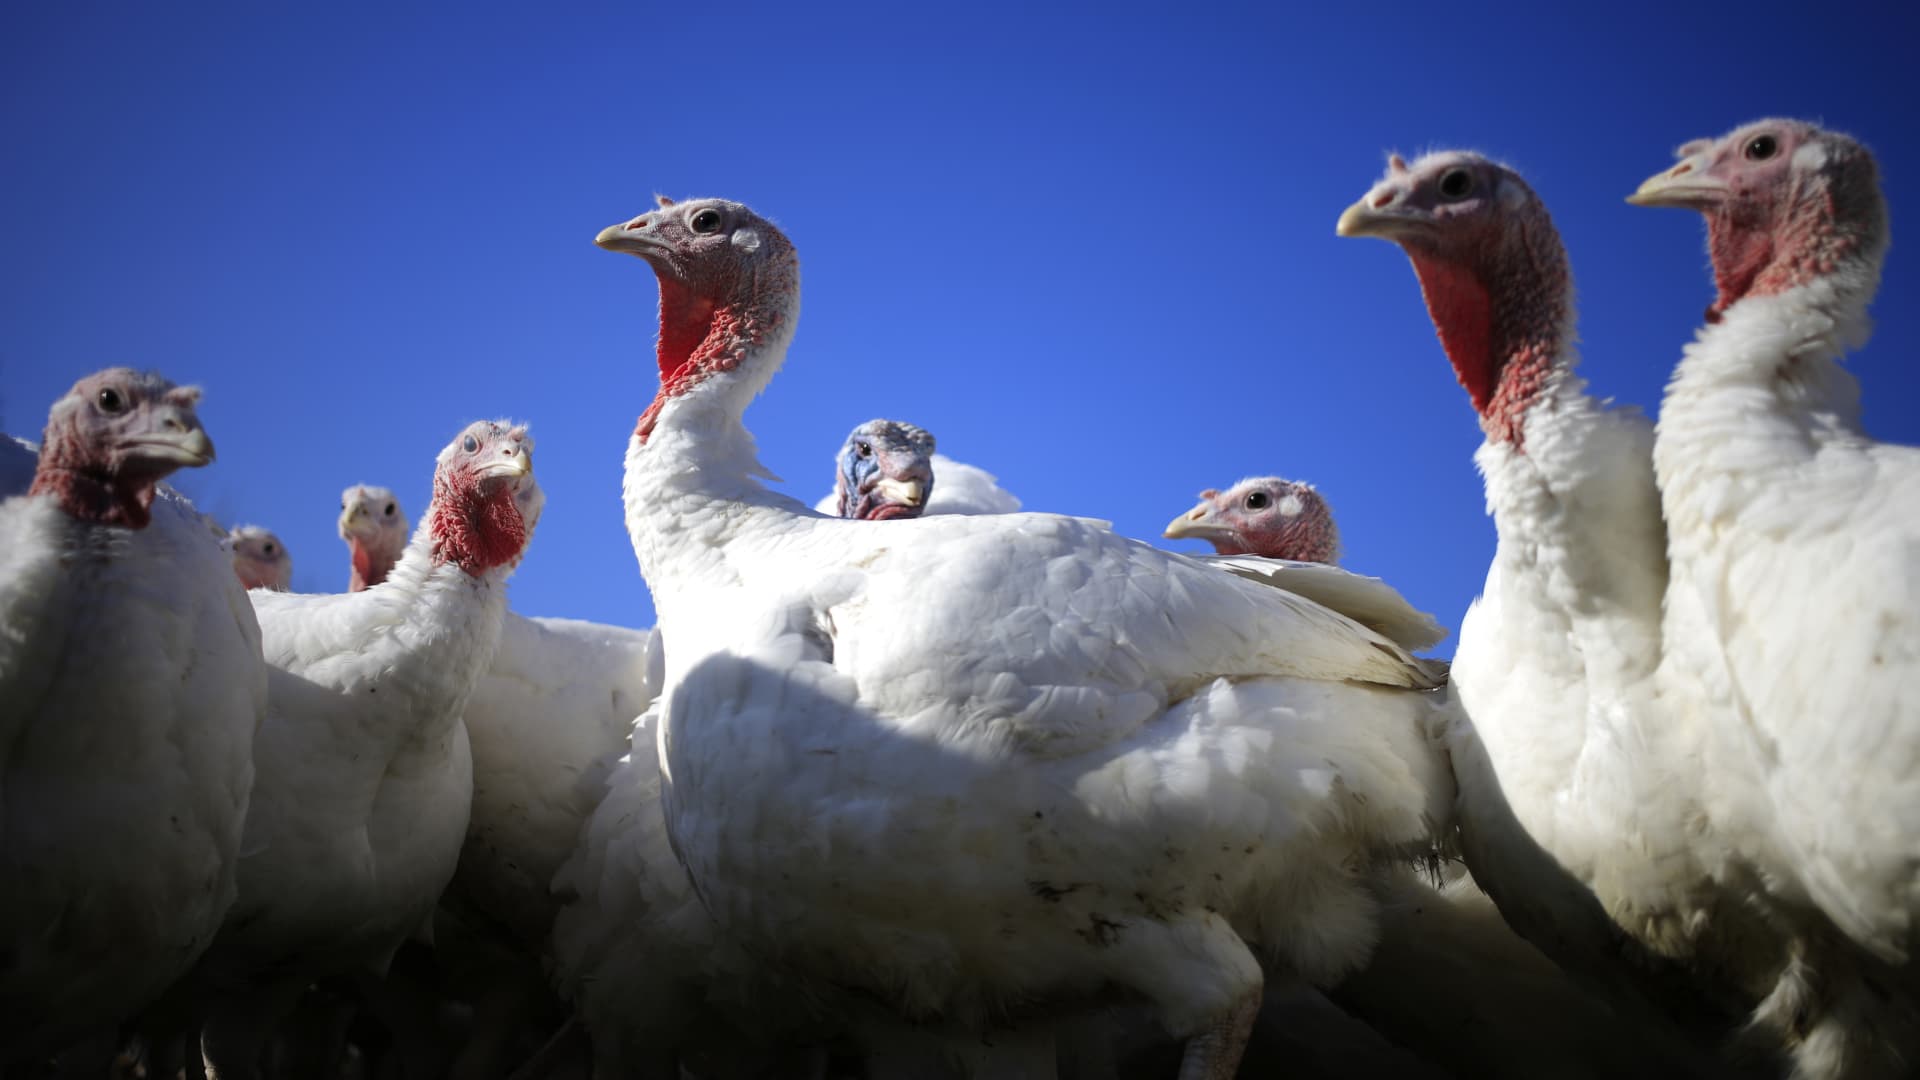 Turkey prices up 73% due to factors like avian flu